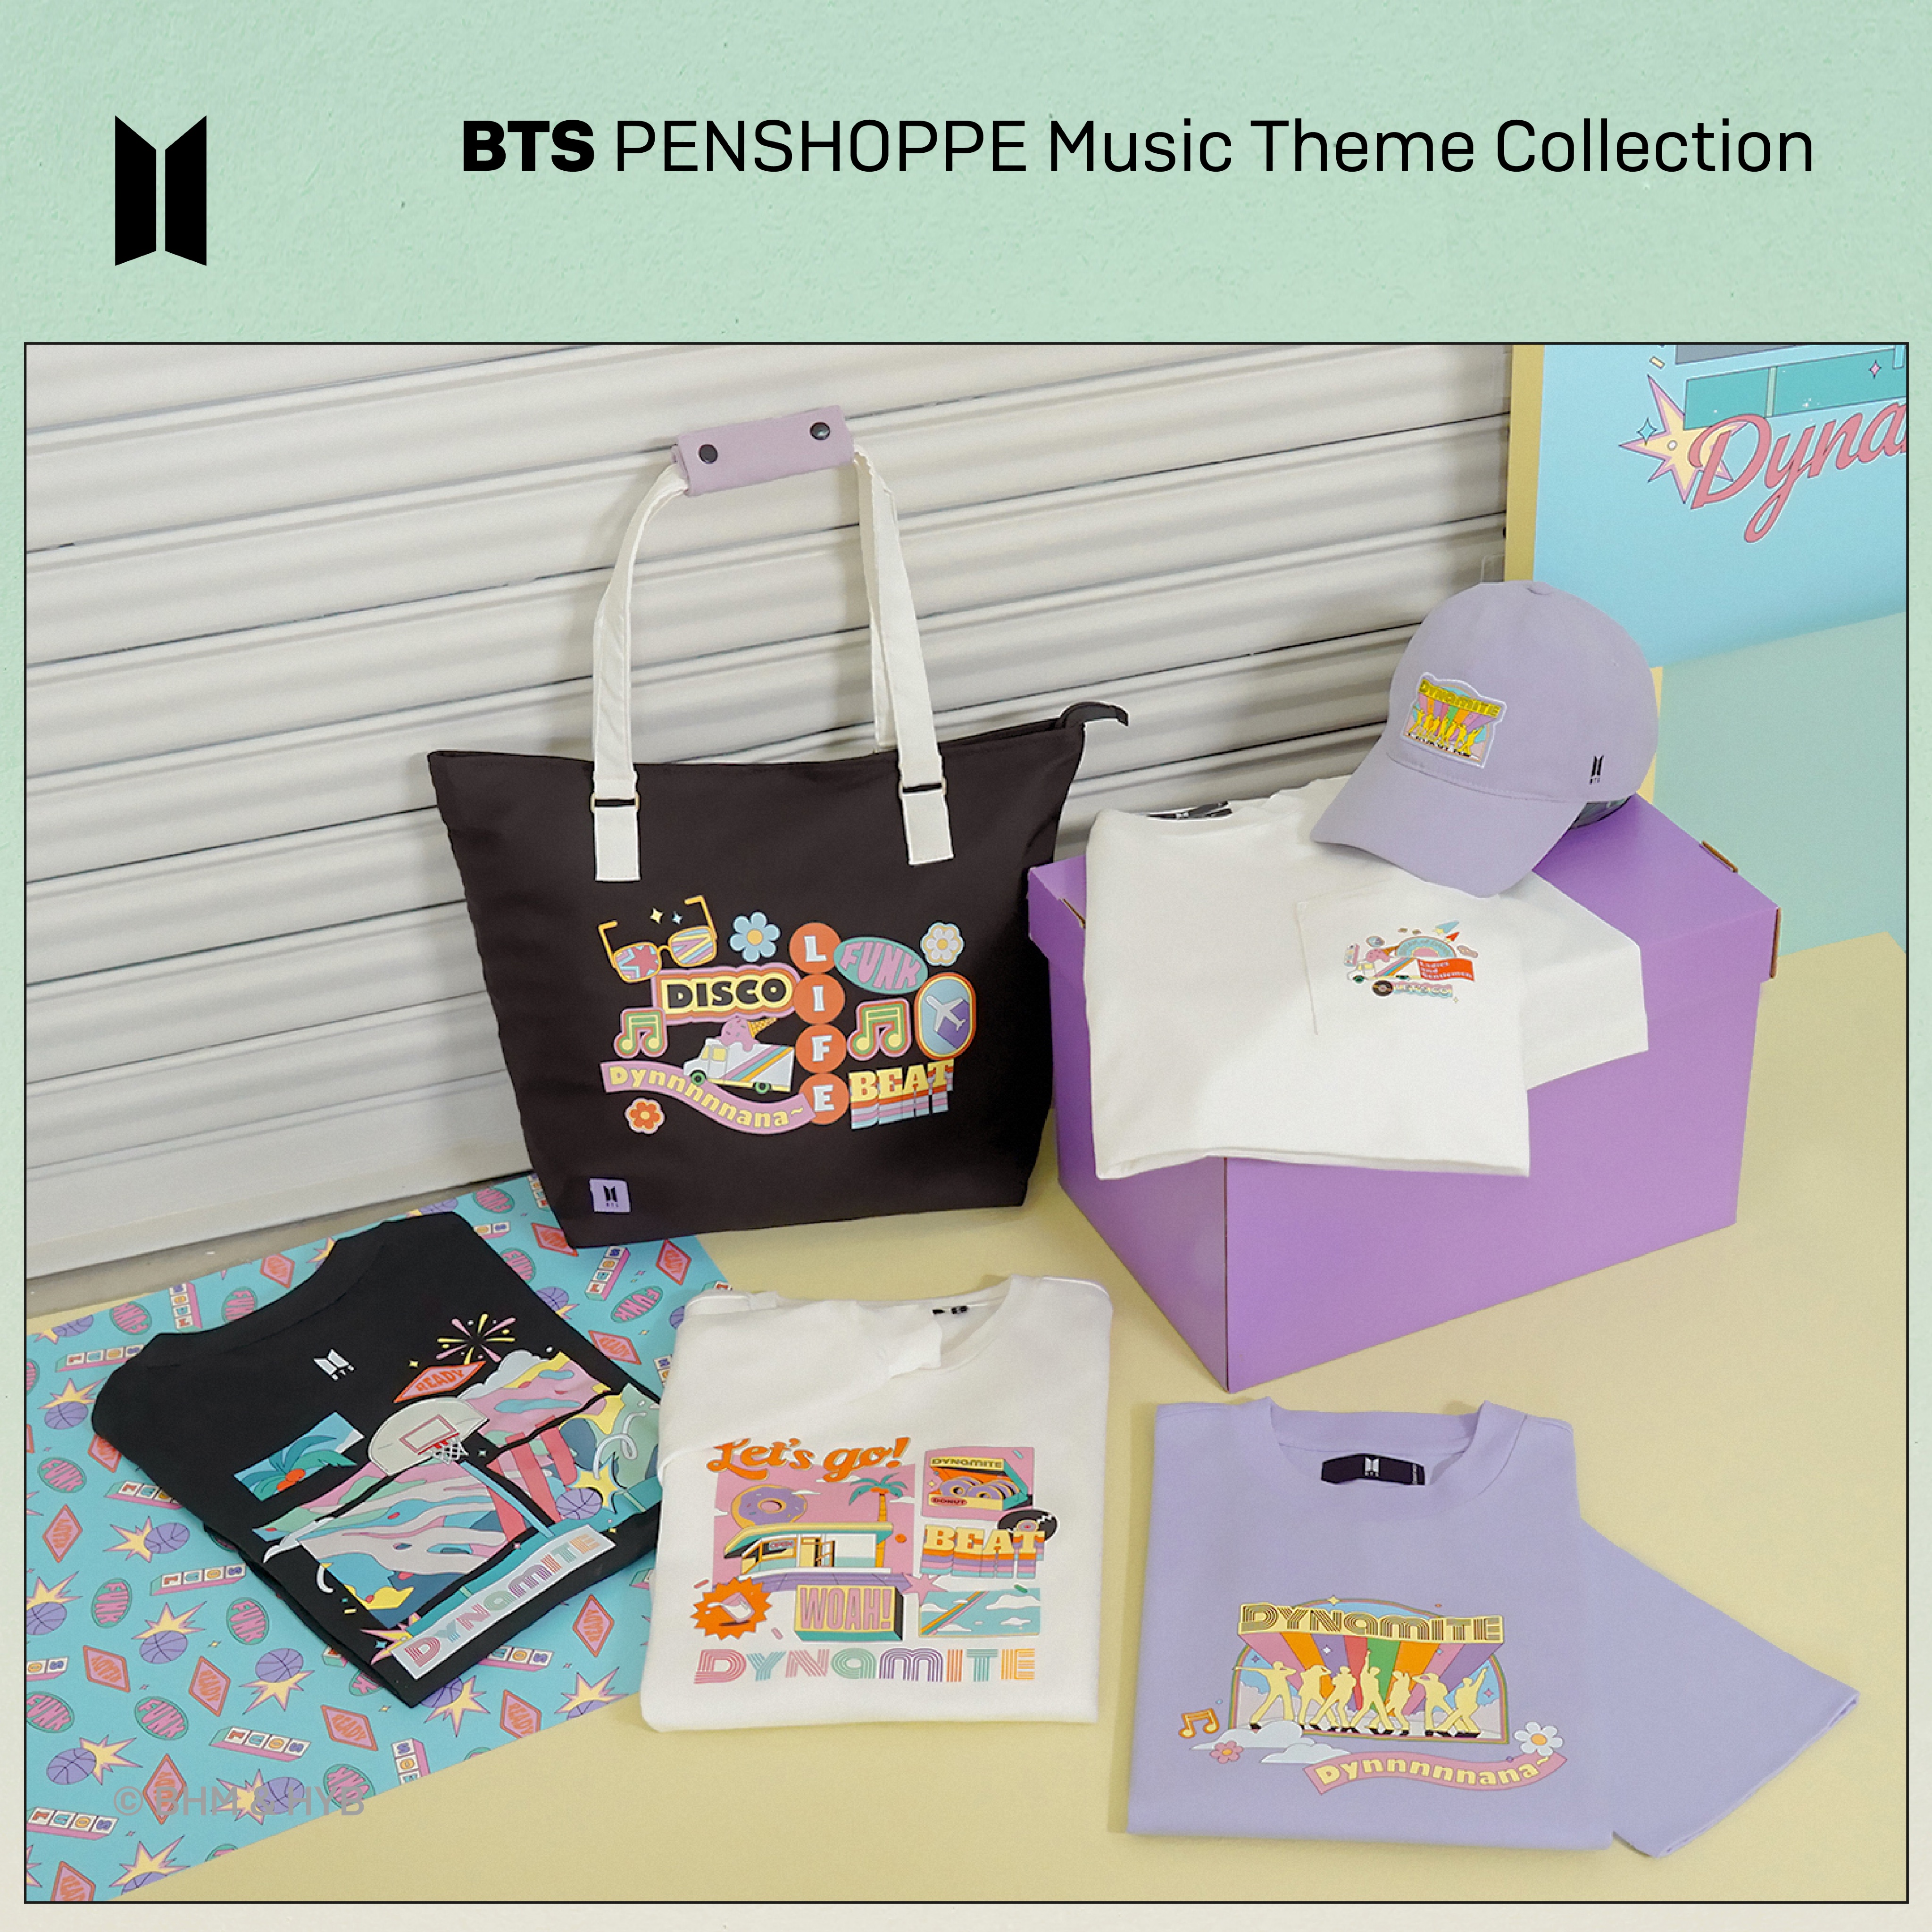 15 Up-and-Coming Trends About bts merch by z1cpypl580 - Issuu